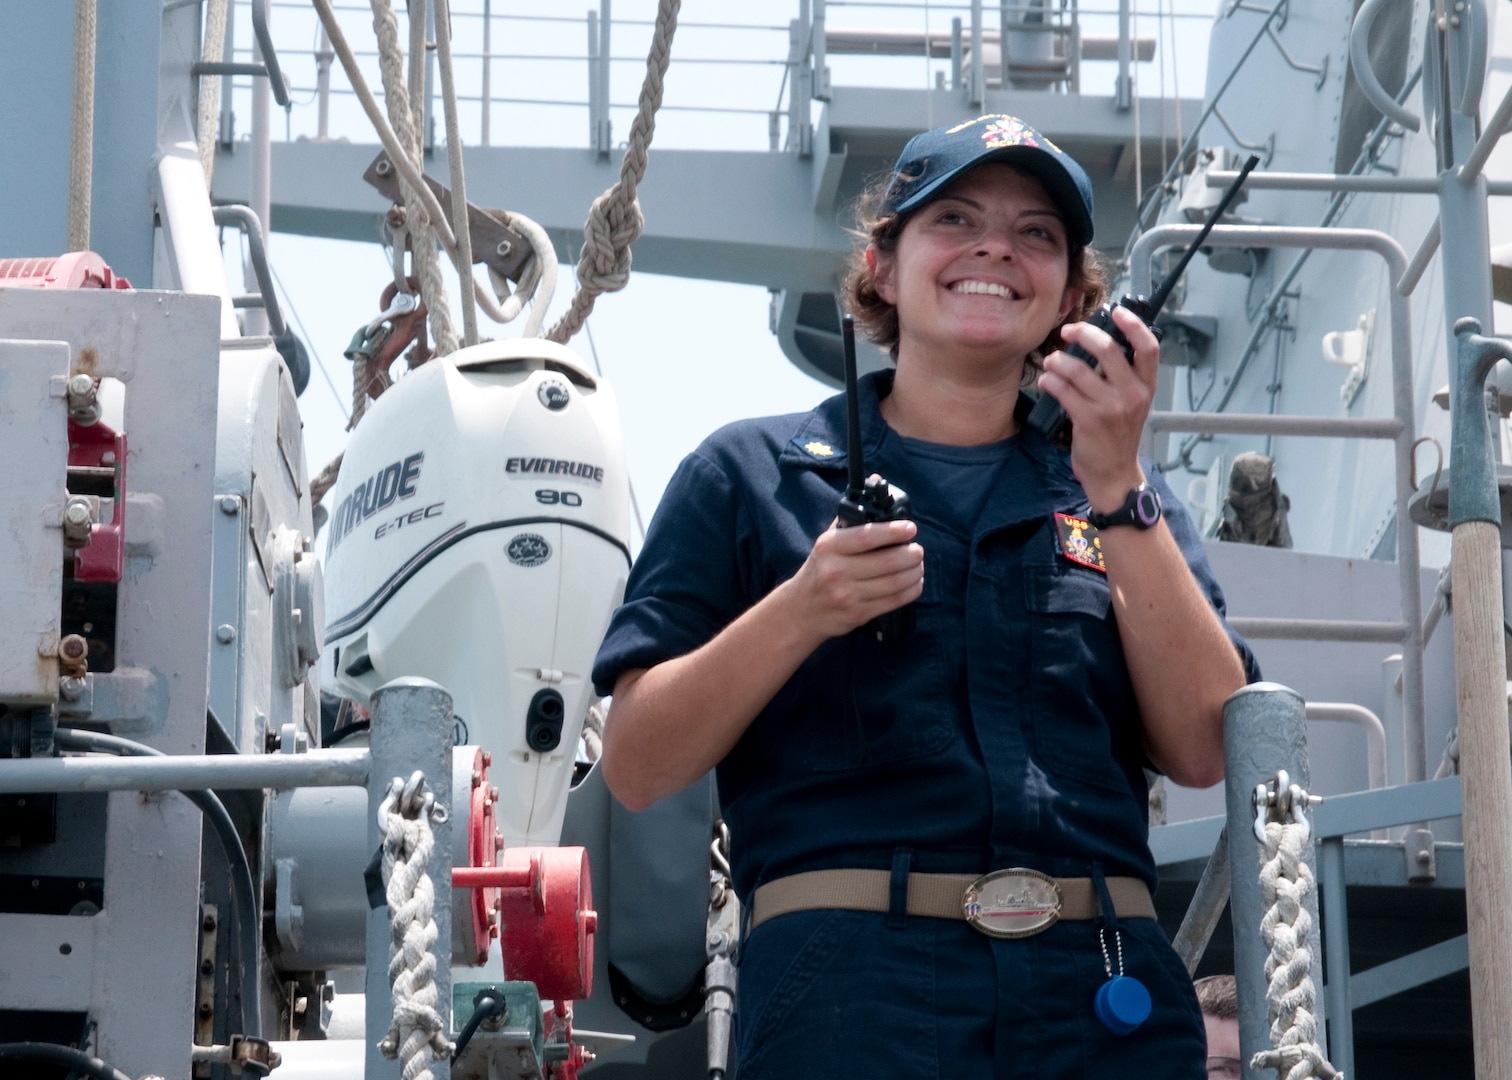 170514-N-XP344-068 ARABIAN GULF (May 14, 2017) Lt. Cmdr. Rebecca Wolf, USS Gladiator's (MCM 11) executive officer, maintains radio contact with crew onboard the Gladiator during shipboard operations in the Arabian Gulf. Gladiator, one of four MCM ships forward deployed to Bahrain and attached to U.S. Naval Forces Central Command's Task Force 52, is a mine sweeper/hunter-killer capable of finding, classifying and destroying mines preserve the freedom of navigation and the free flow of commerce in the U.S. 5th Fleet area of operations. (U.S. Navy photo by Mass Communication Specialist 2nd Class Victoria Kinney)